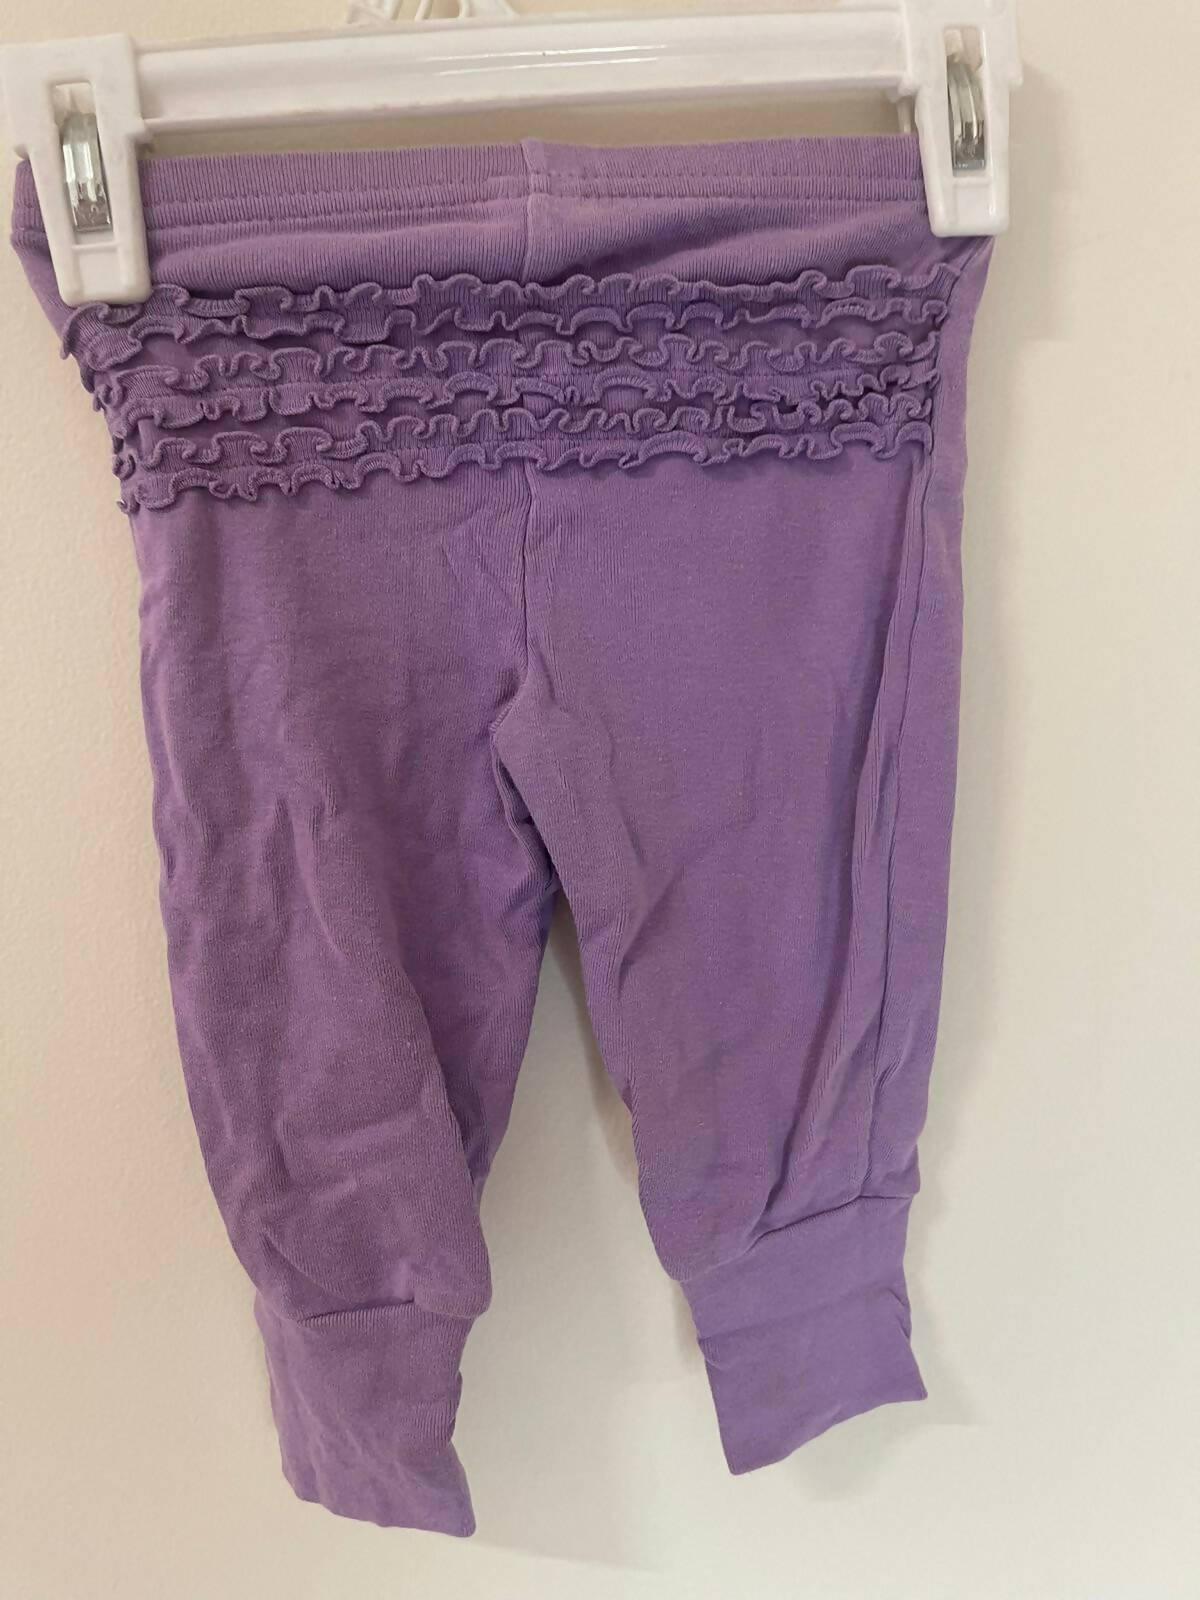 Carter’s | Frill Purple Trousers 6 months | Girls Bottoms & Pants | Preloved